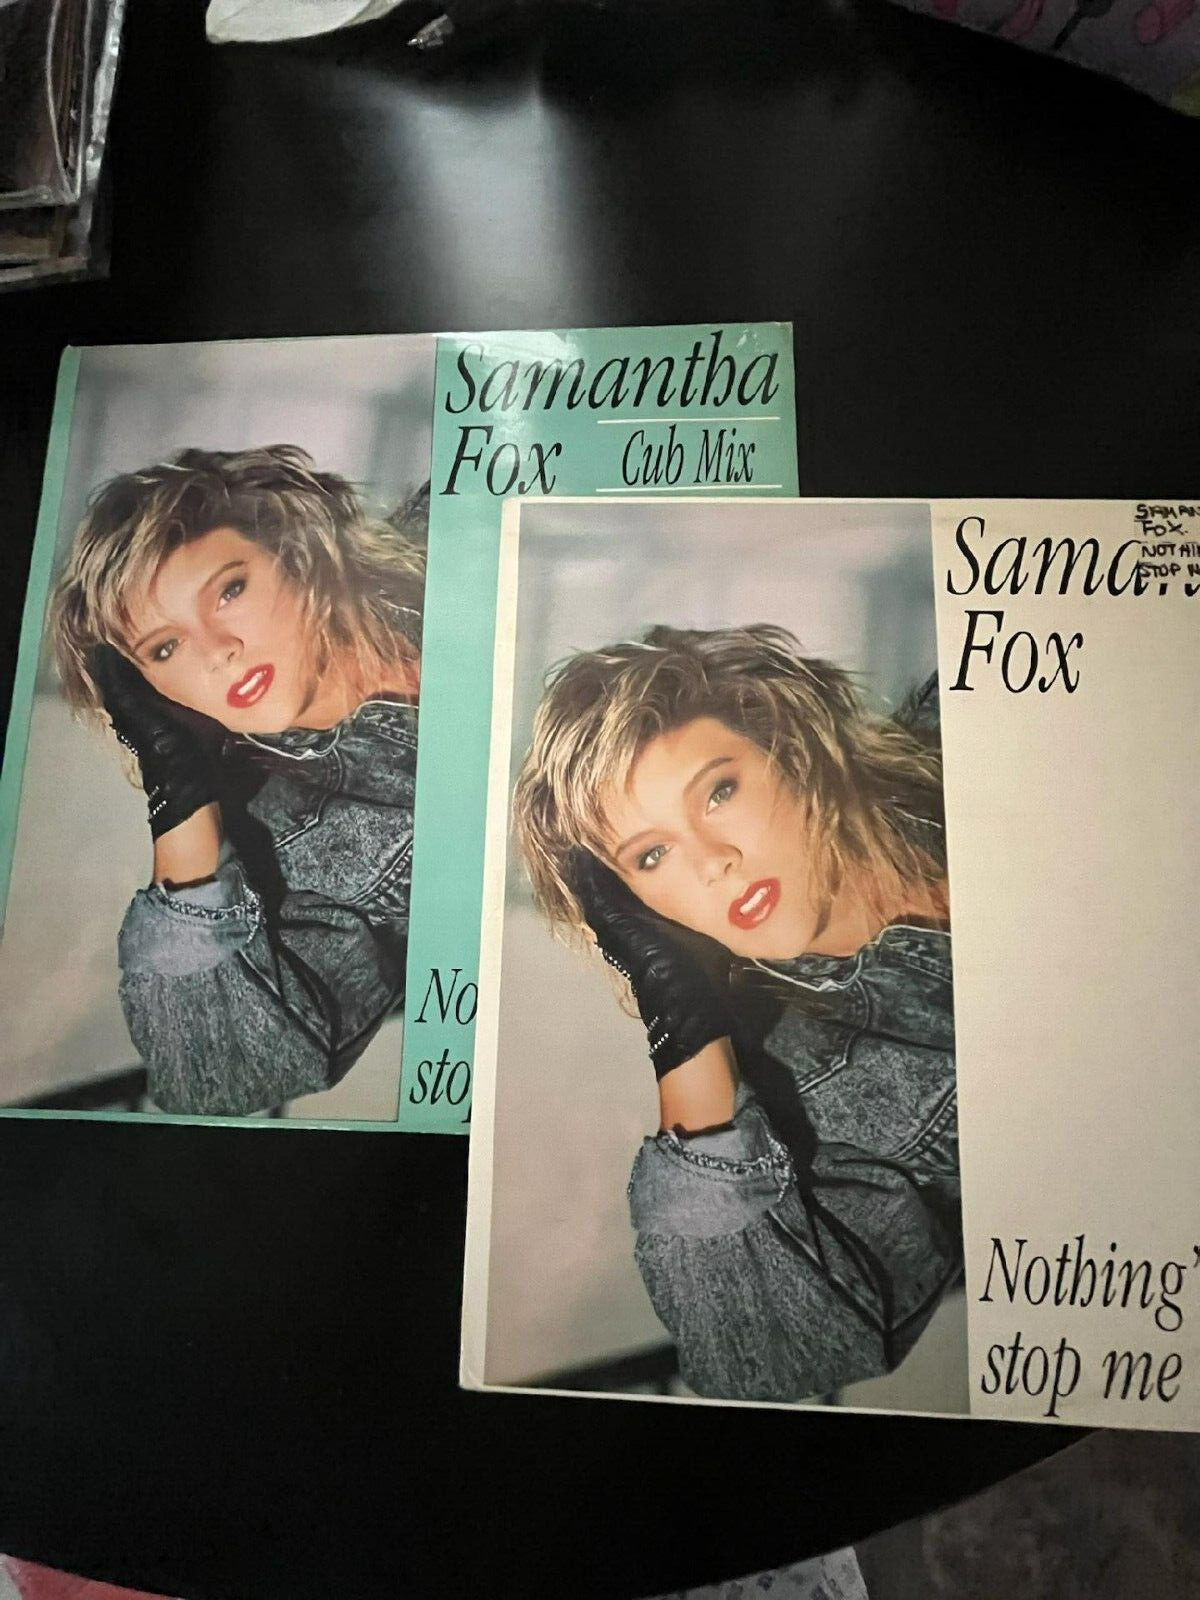 CLUB MIX 12" IN BLUE  SAMANTHA FOX NOTHING GONNA STOP ME NOW & EP IN WHITE COVER